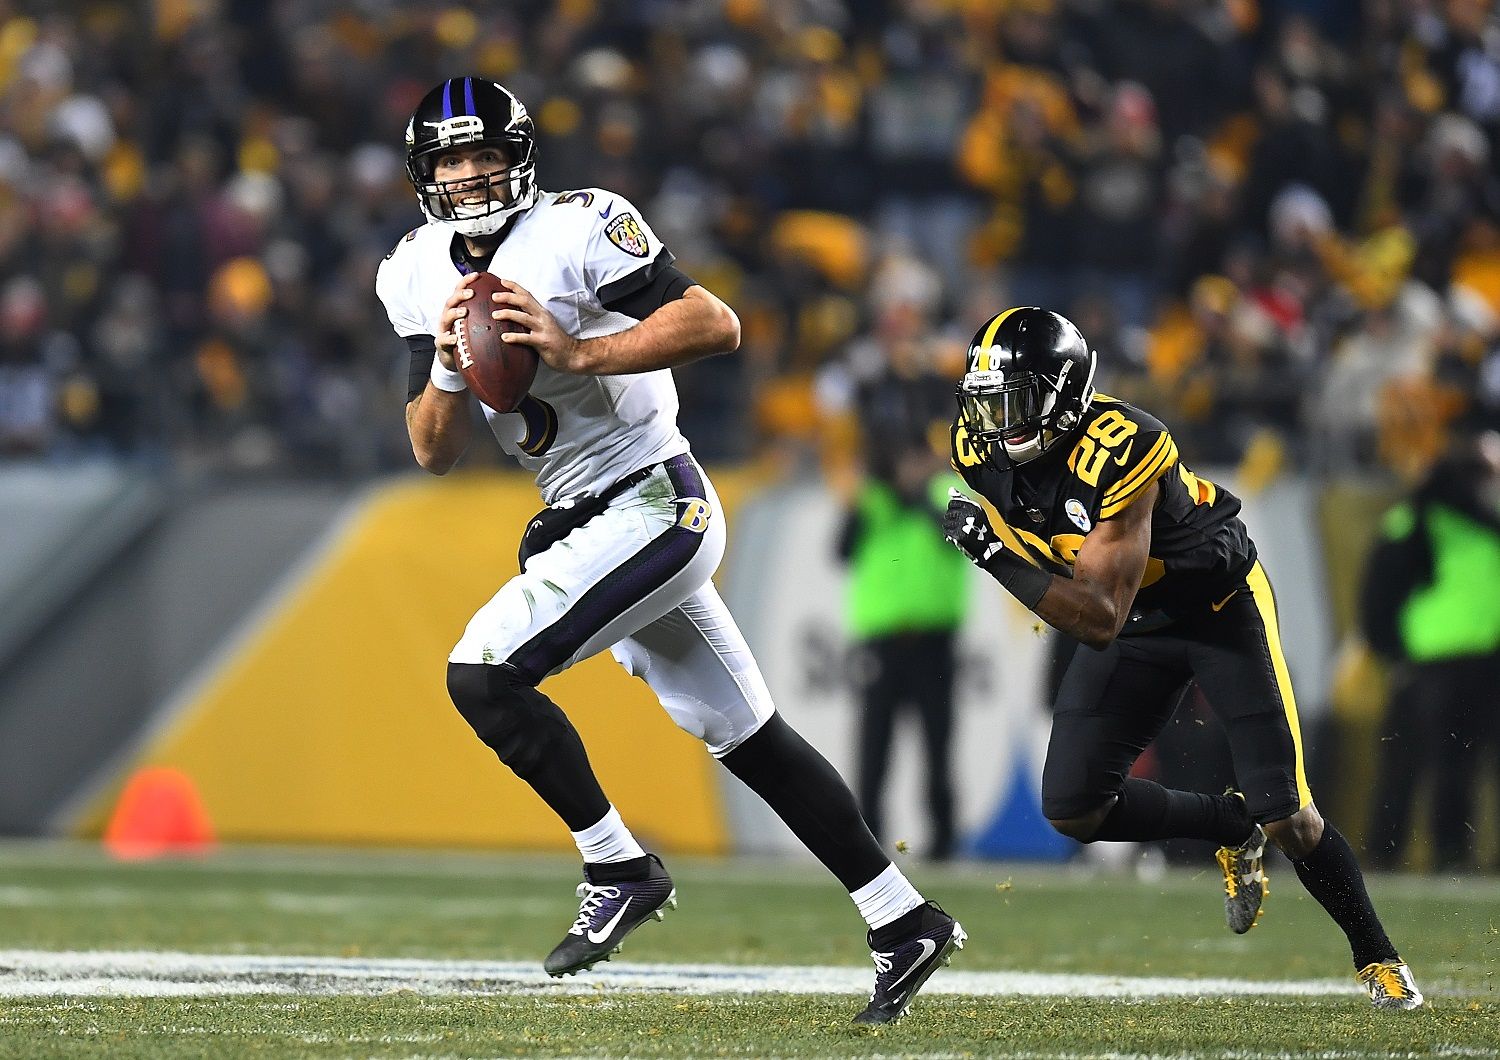 PITTSBURGH, PA - DECEMBER 25:  Joe Flacco #5 of the Baltimore Ravens scrambles to avoid the oncoming rush of Sean Davis #28 of the Pittsburgh Steelers during the game at Heinz Field on December 25, 2016 in Pittsburgh, Pennsylvania. (Photo by Joe Sargent/Getty Images)